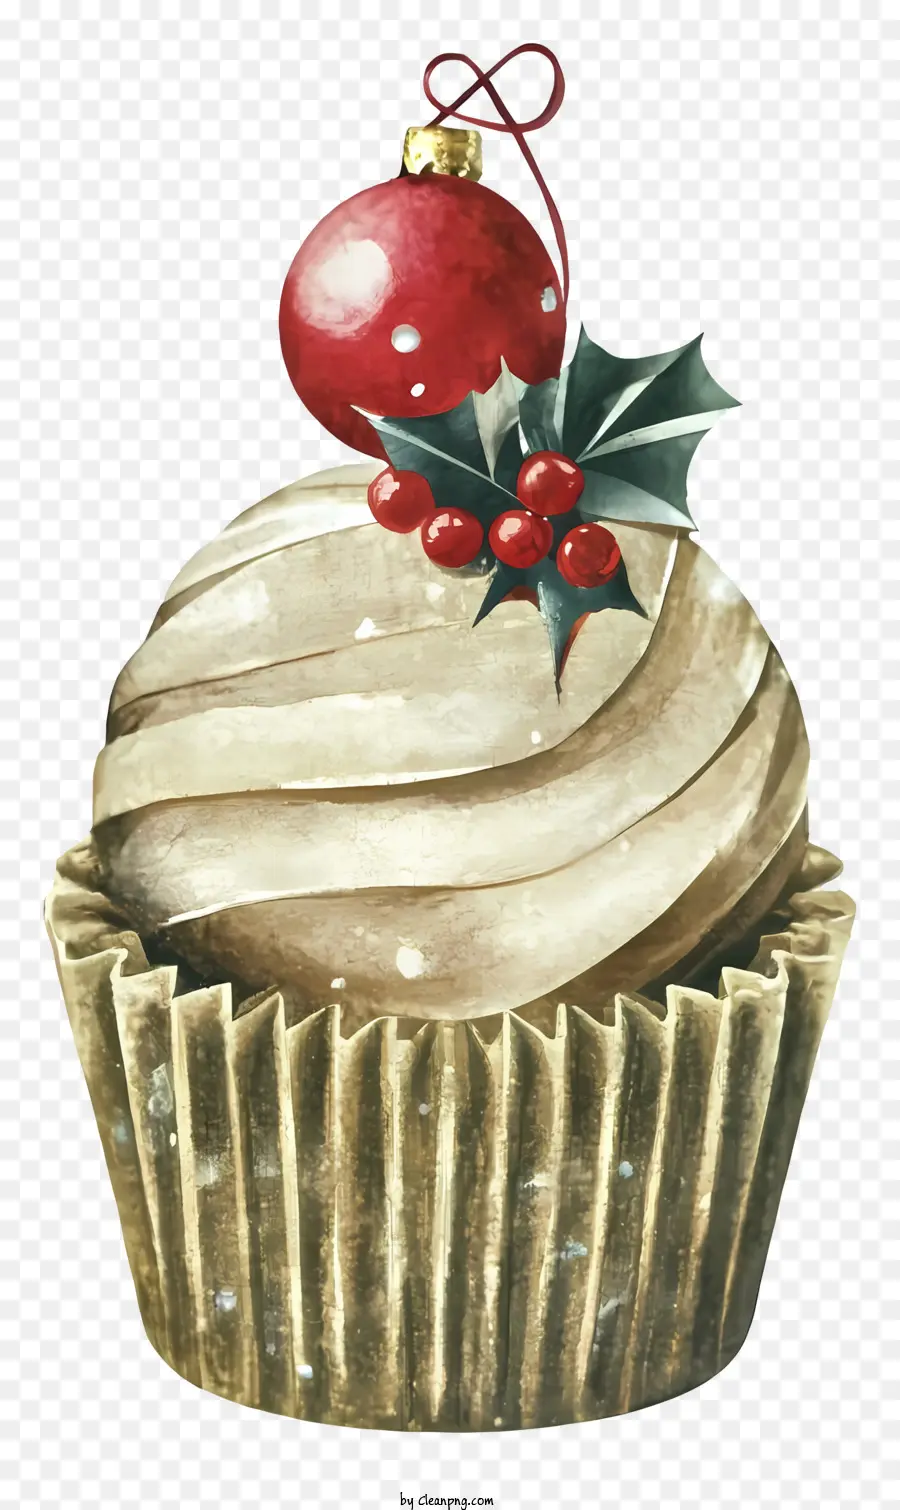 cupcake holly berries red frosting white frosting spikey texture